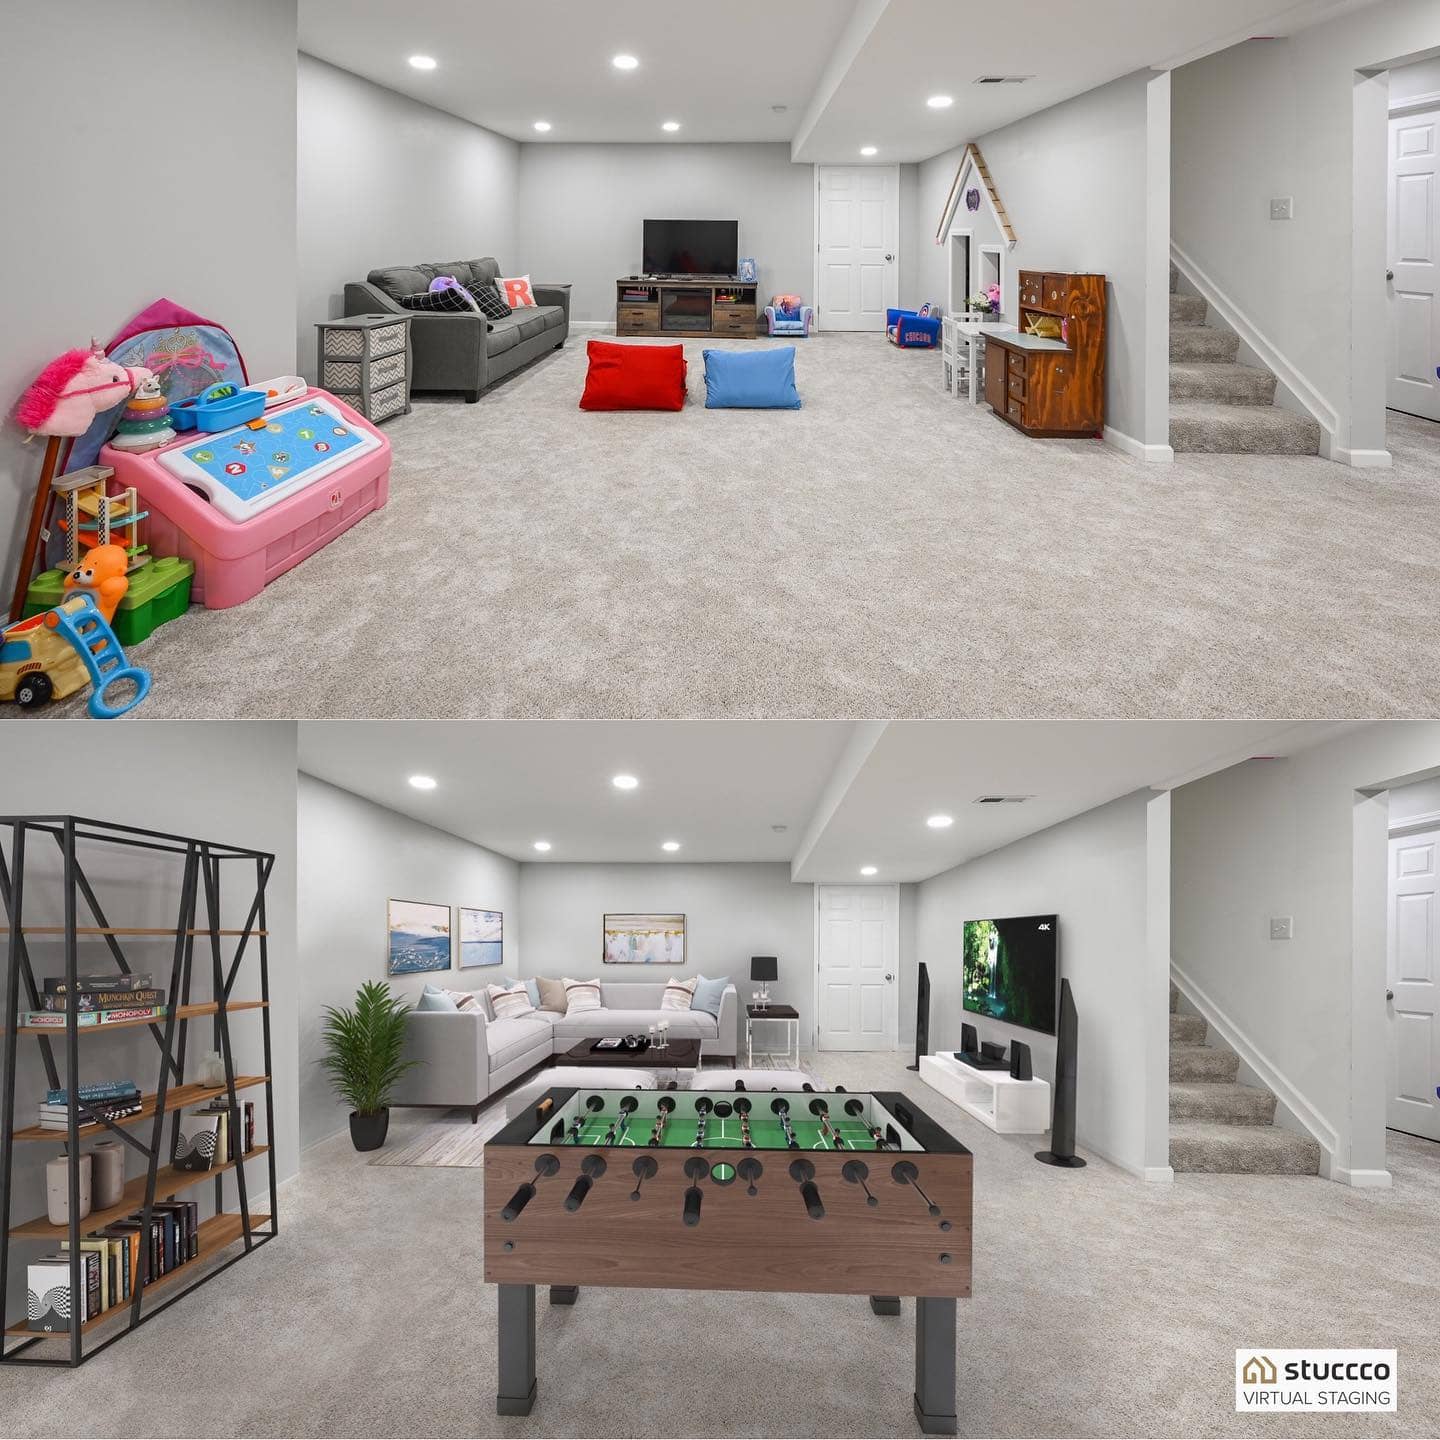 Example of a virtually staged basement from Stuccco